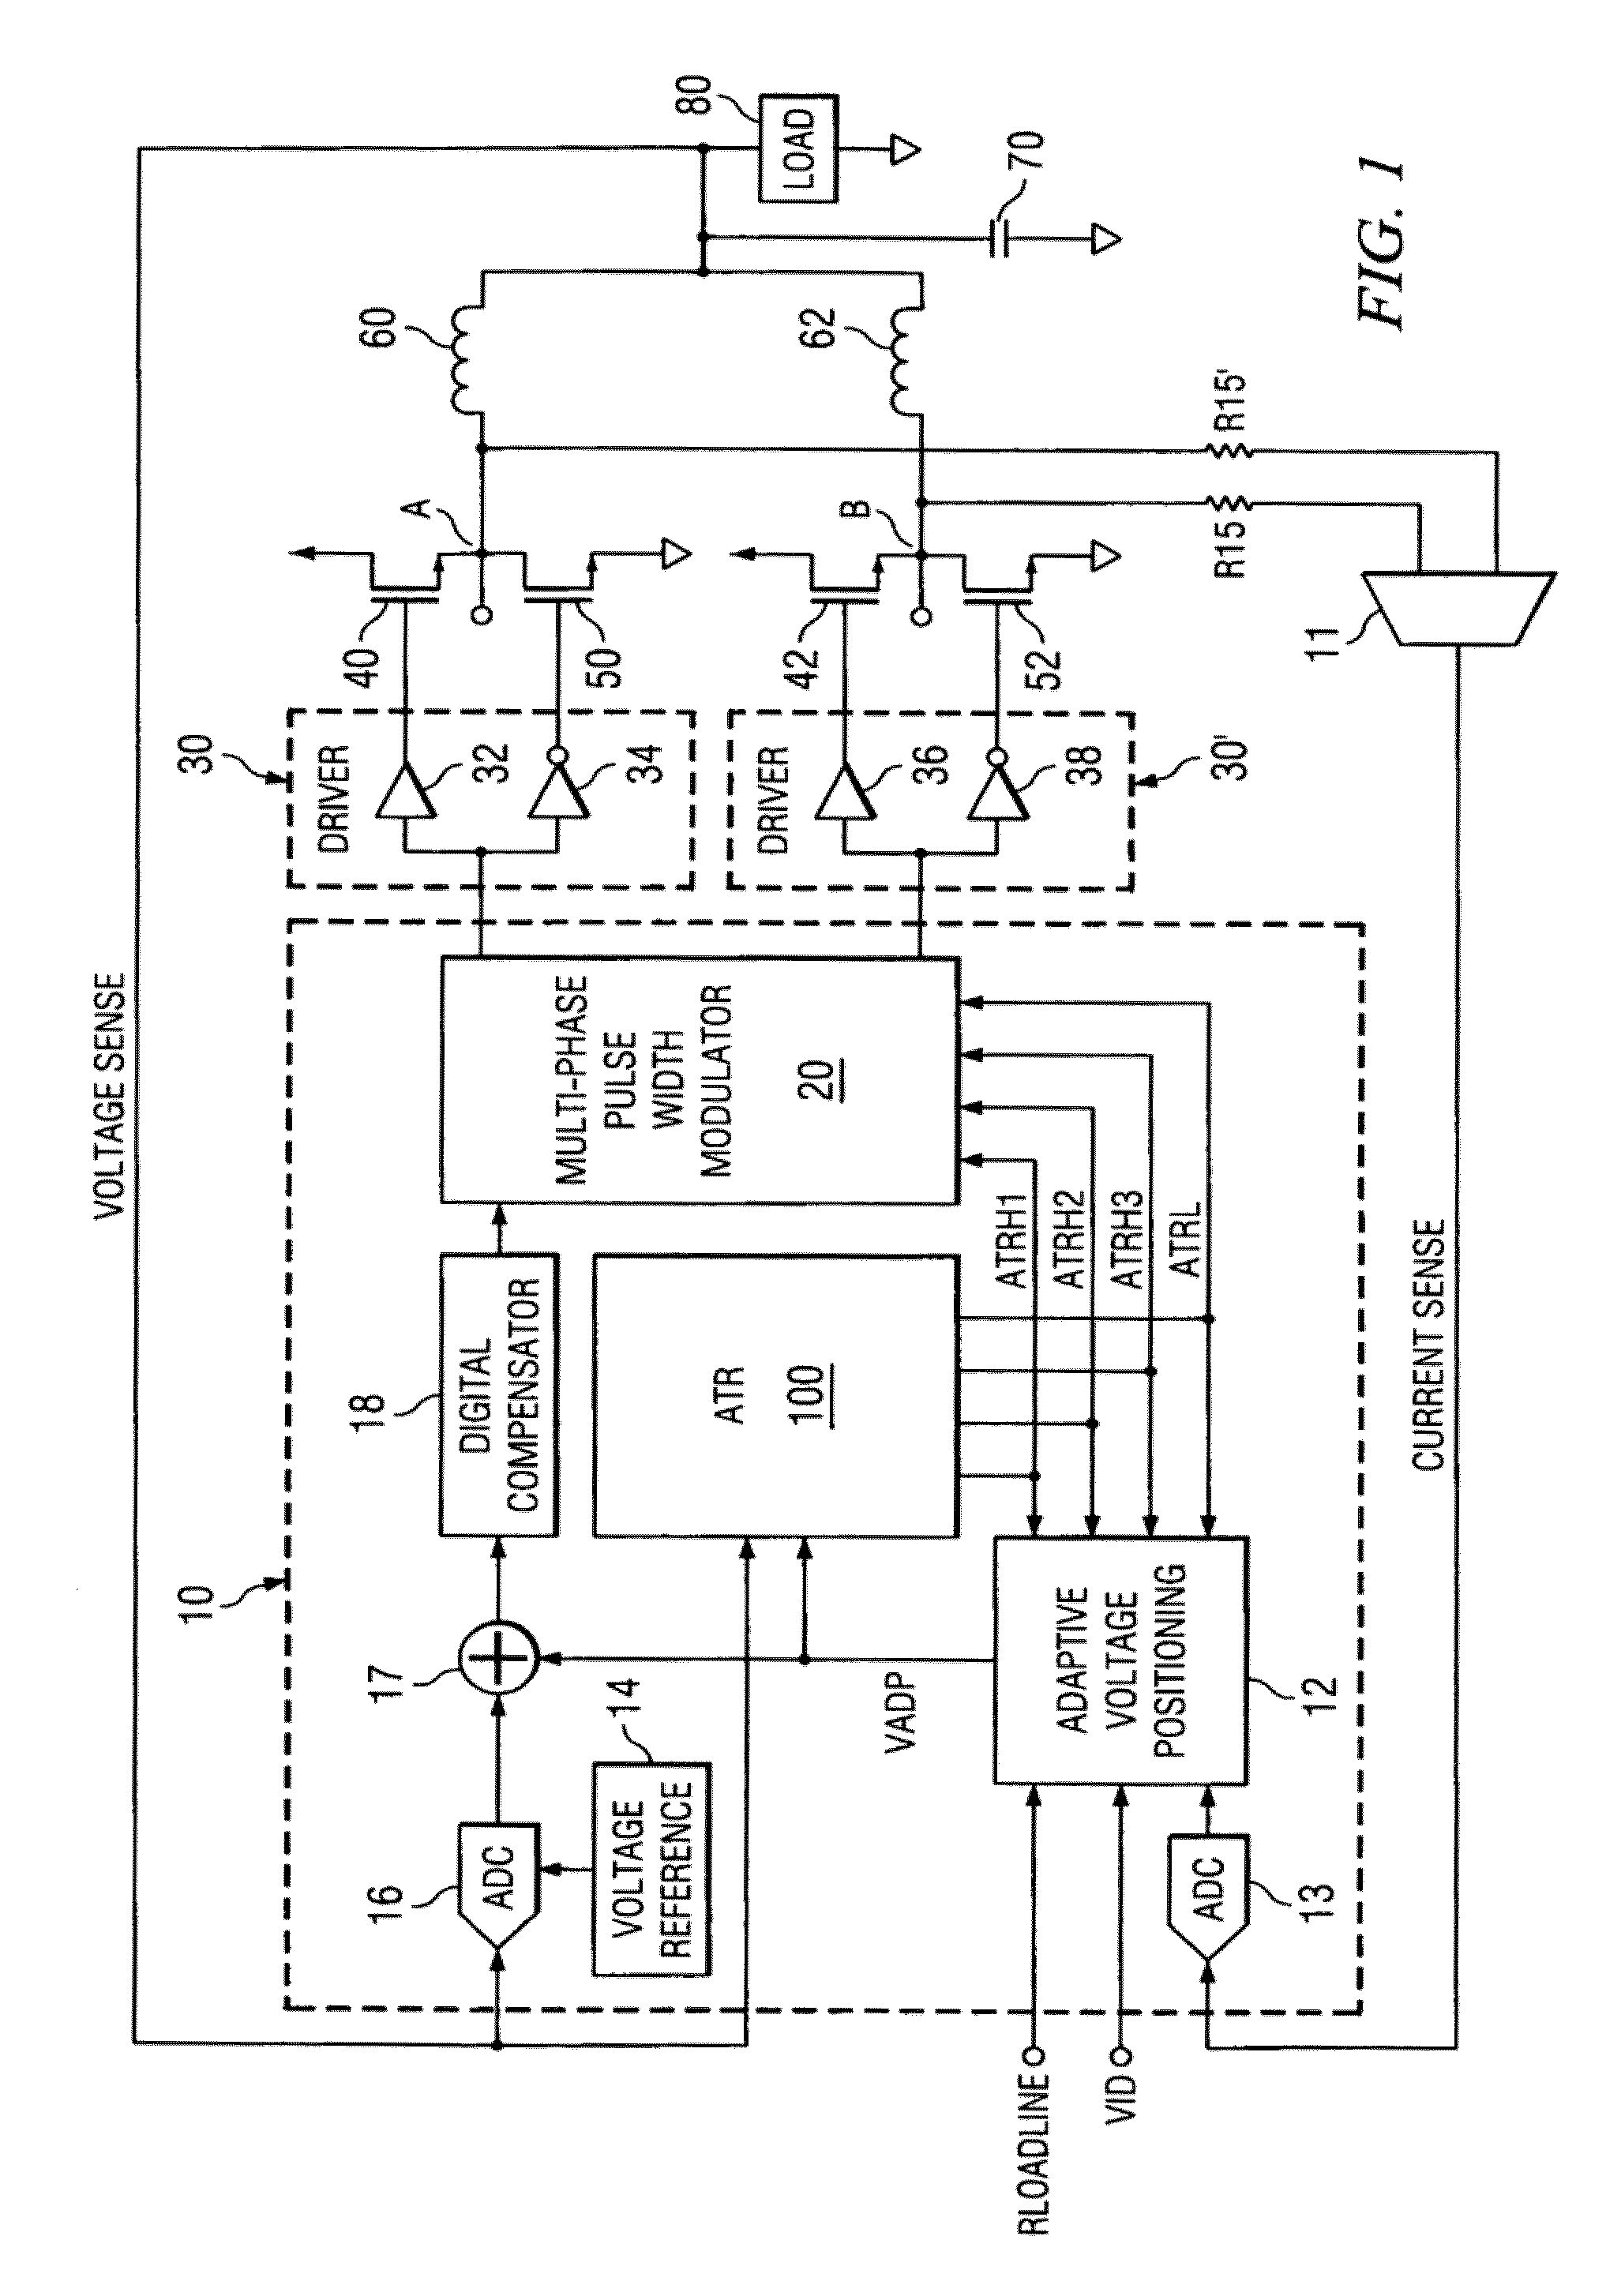 Multiphase power regulator with load adaptive phase control